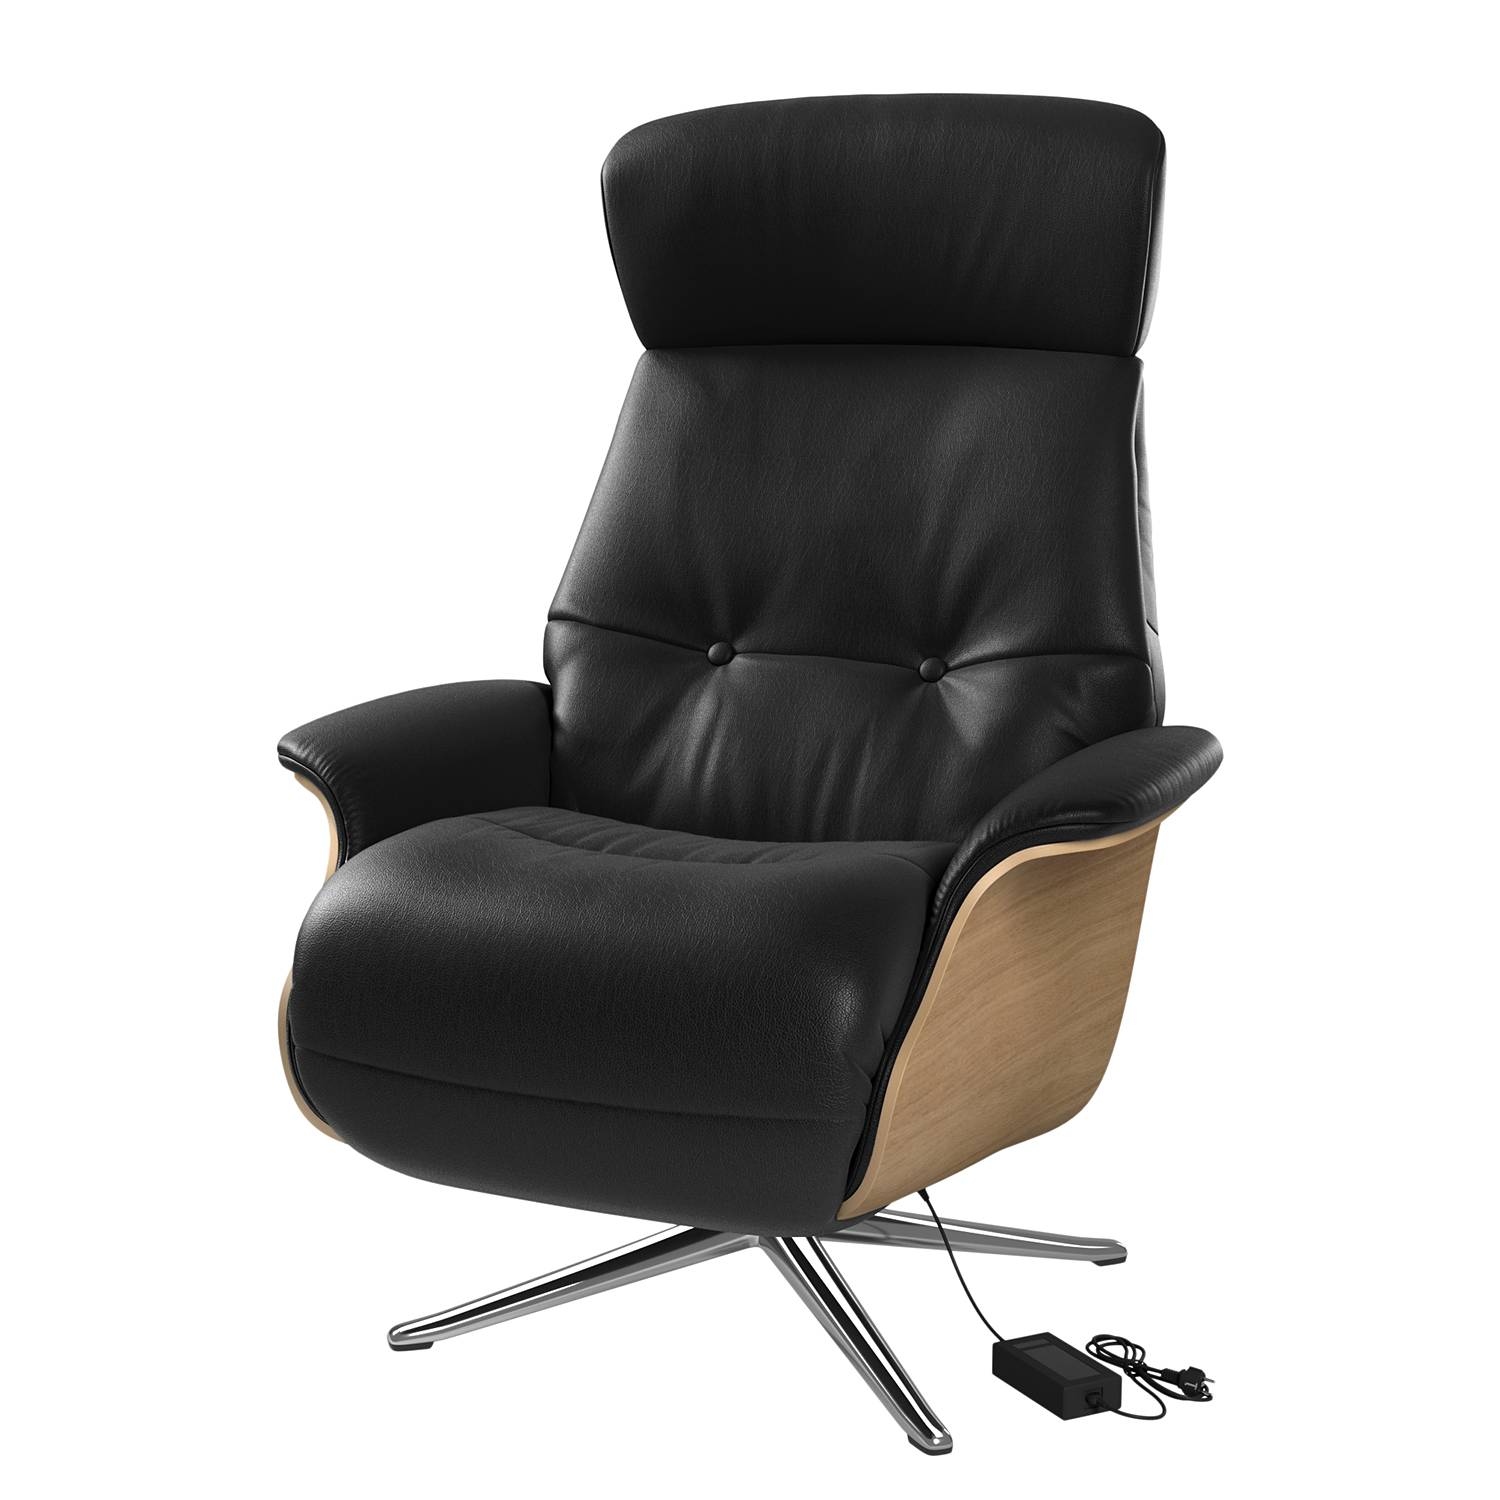 Image of Fauteuil relax Anderson VI 000000001000131442